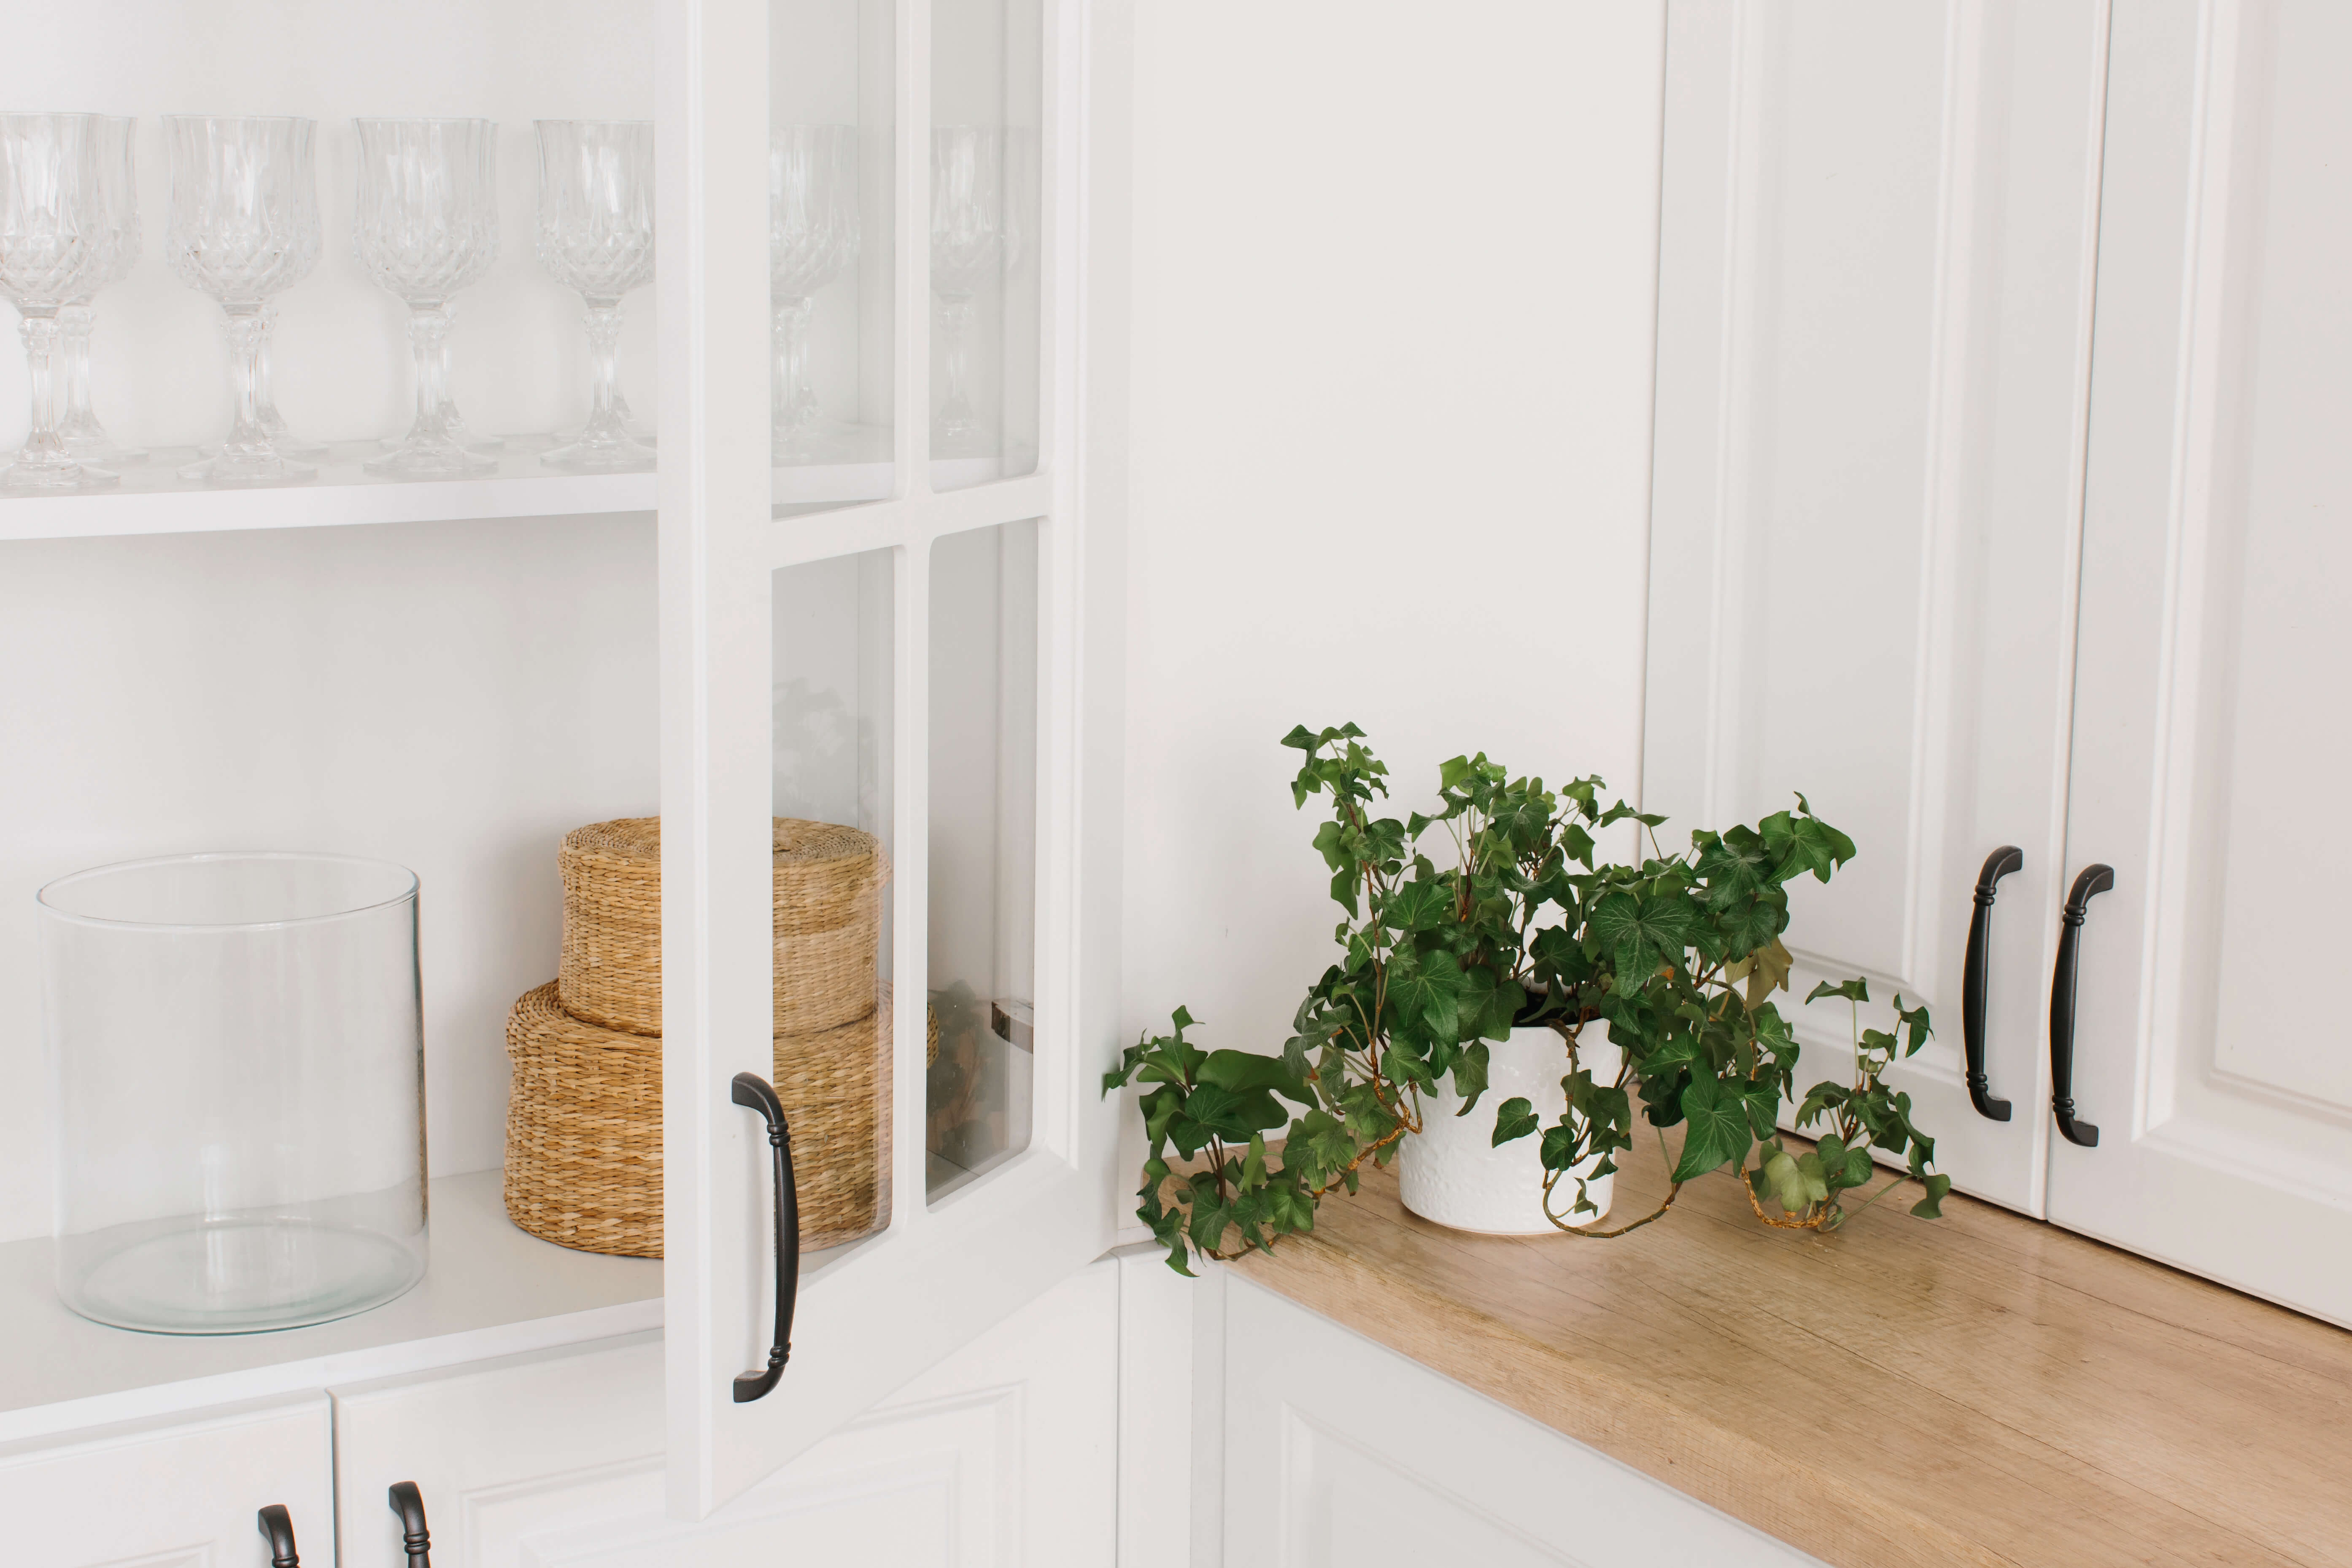 Keeping the cupboards neat with organized dishes and a basket makes it feel tidy and fresh. 